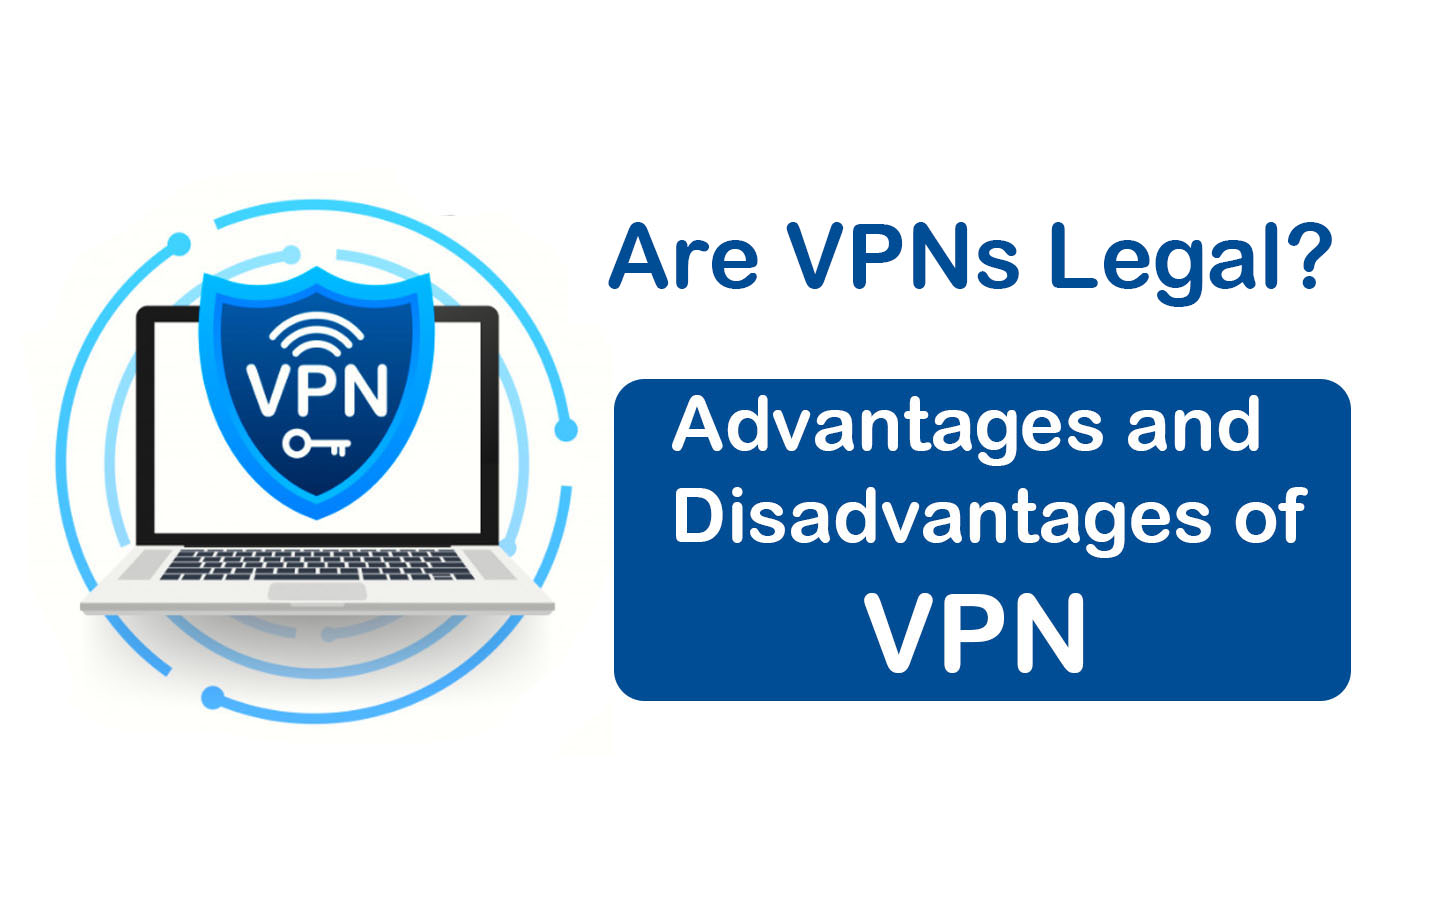 Are VPNs Legal? - Advantages and Disadvantages of VPN in 2021